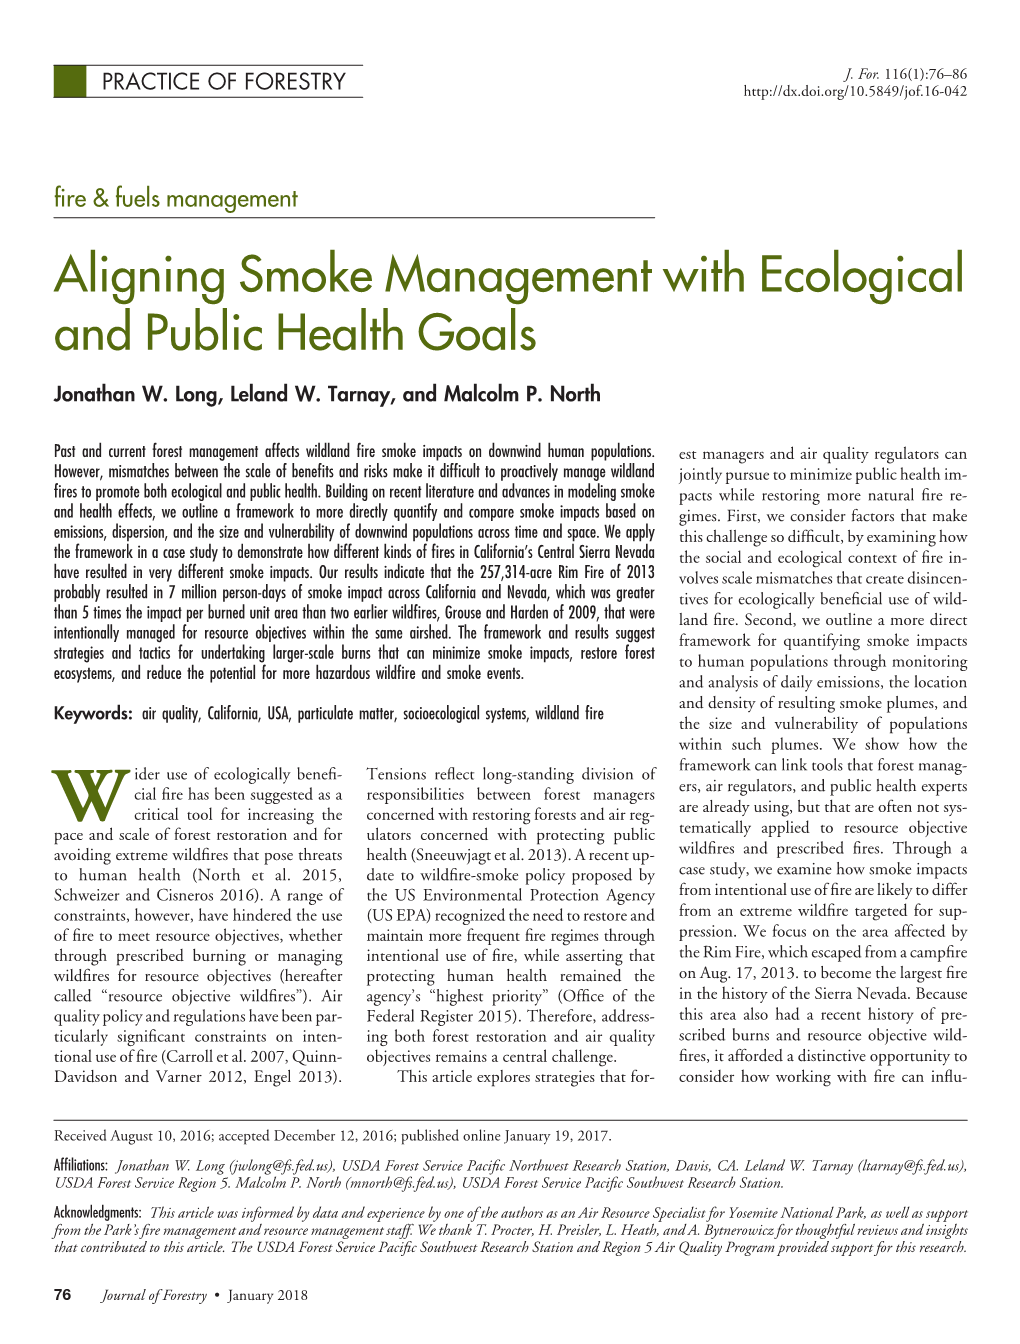 Aligning Smoke Management with Long-Term Ecological and Public